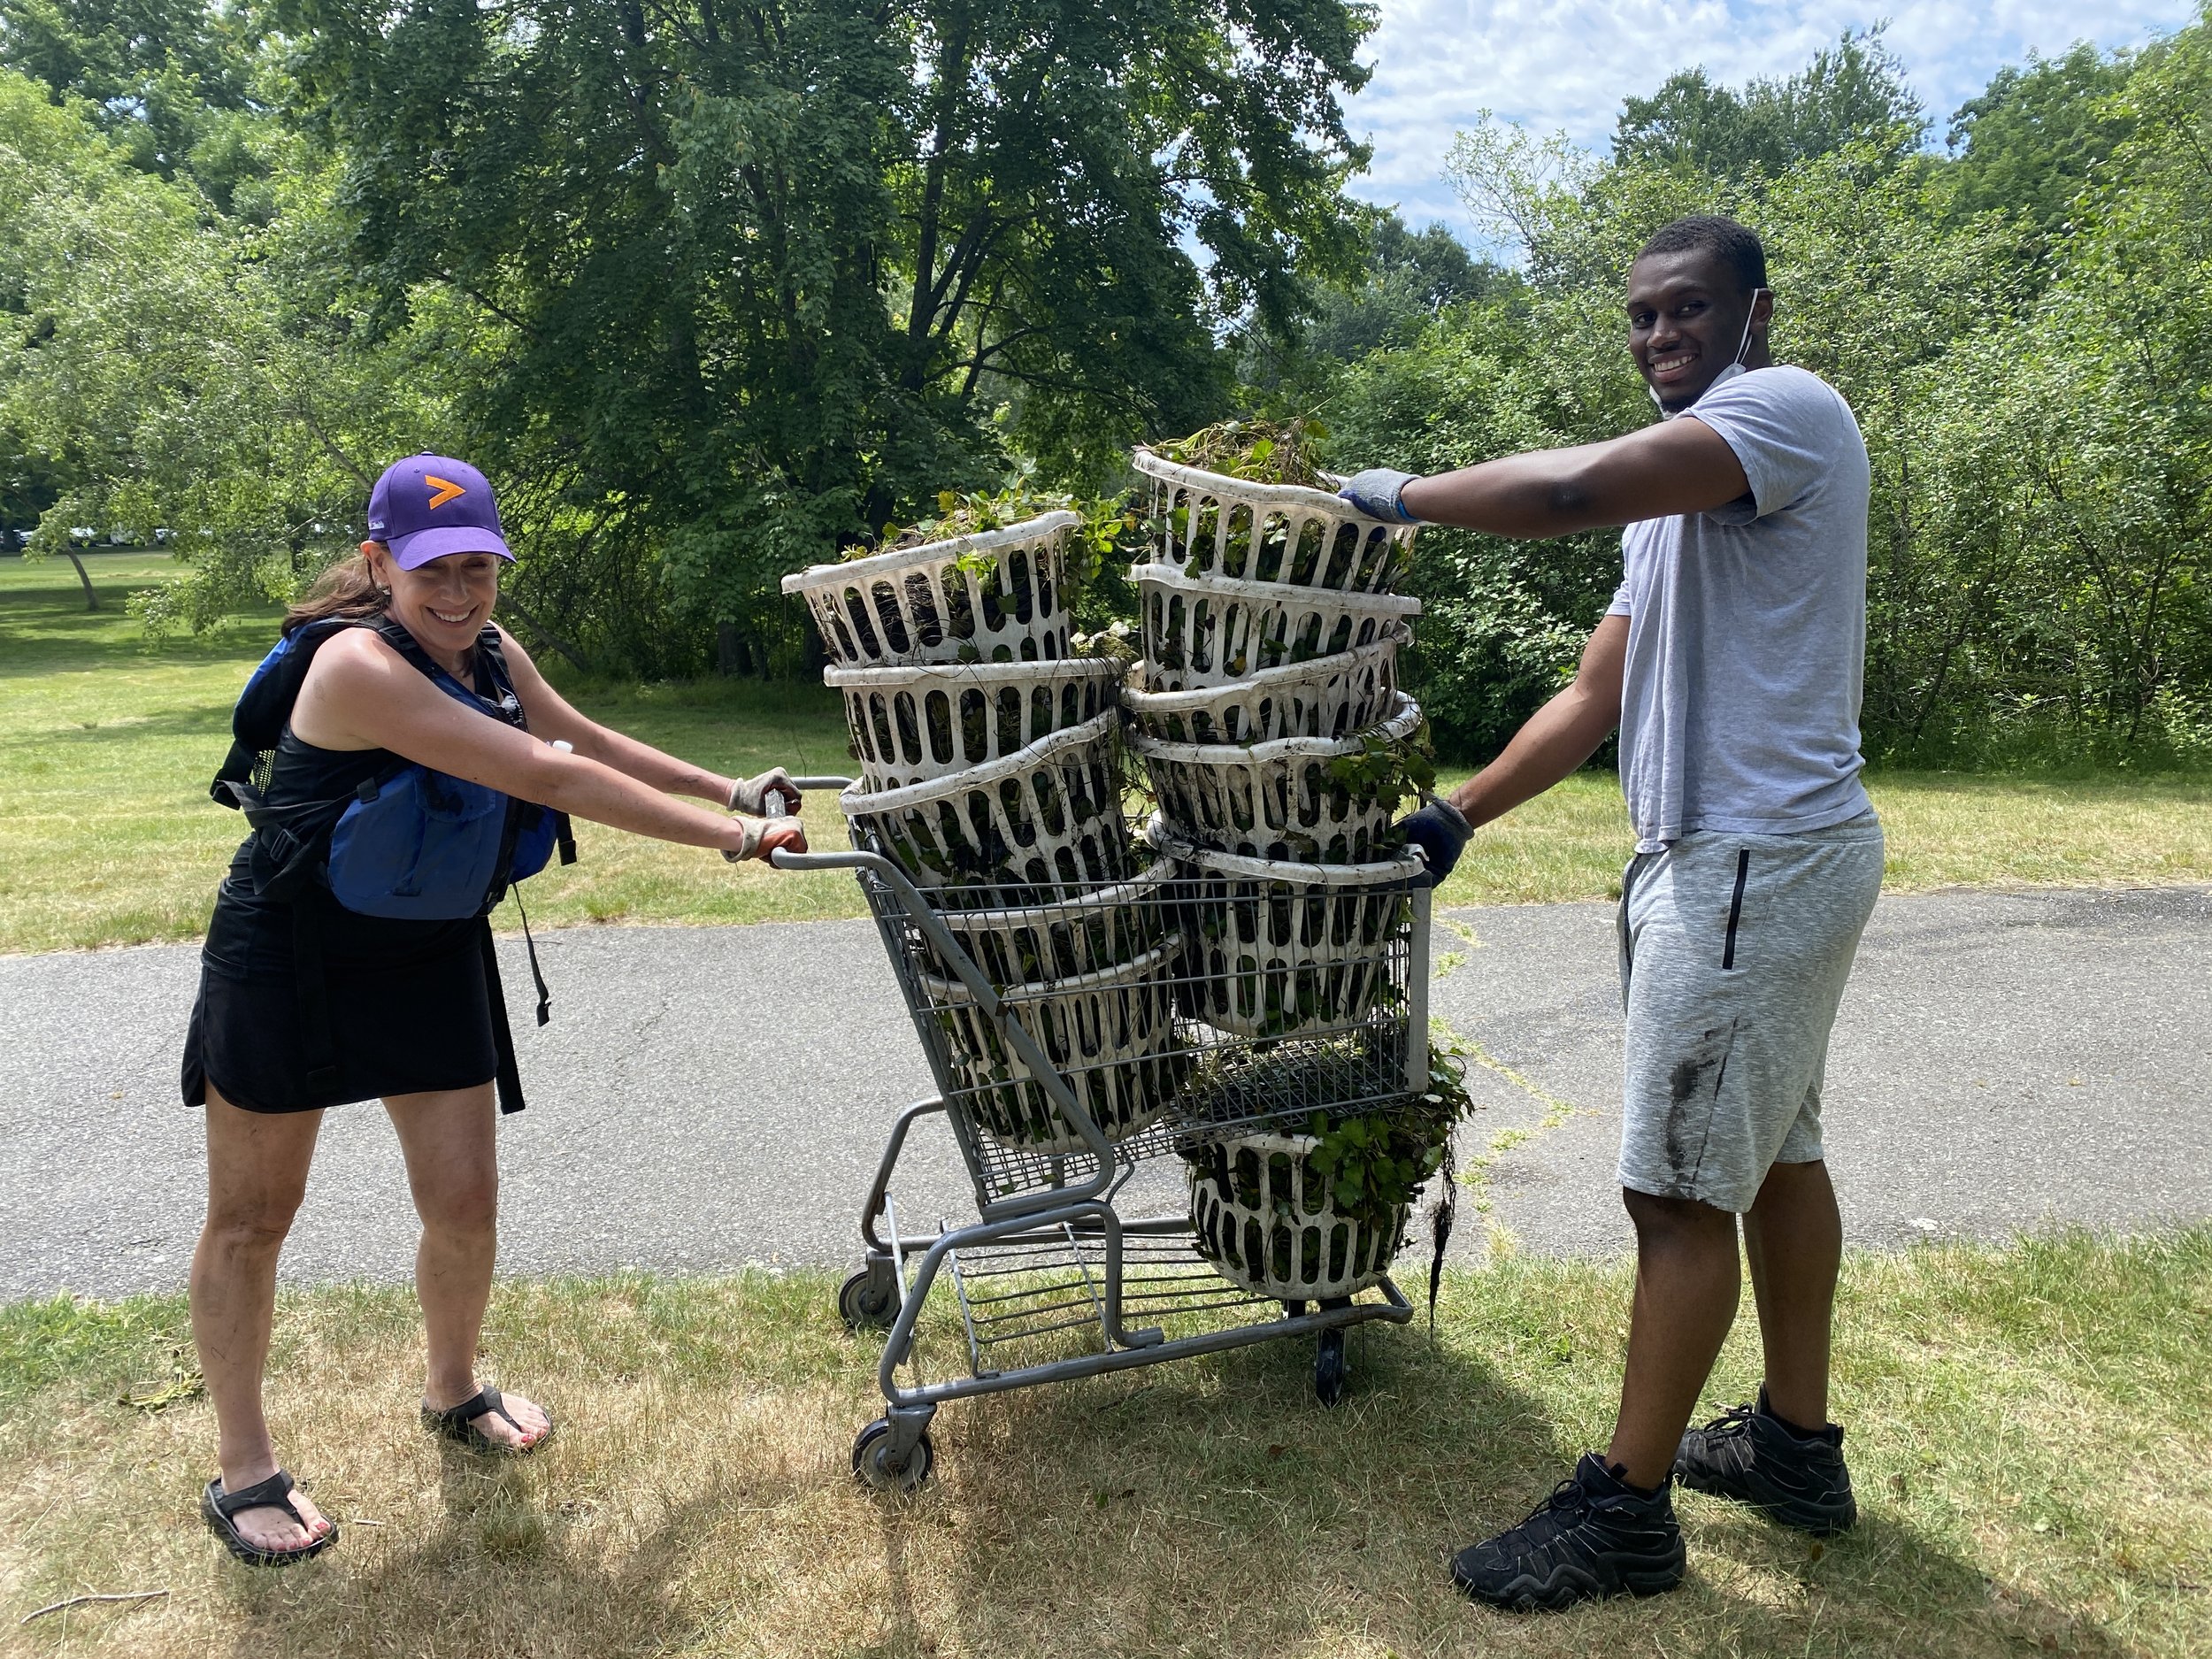  6.17.2022 | A lucky find, this laundry basket made our trips to the compost dumpster to deposit  invasive water chestnut  much more efficient. Credit: Daria Clark 